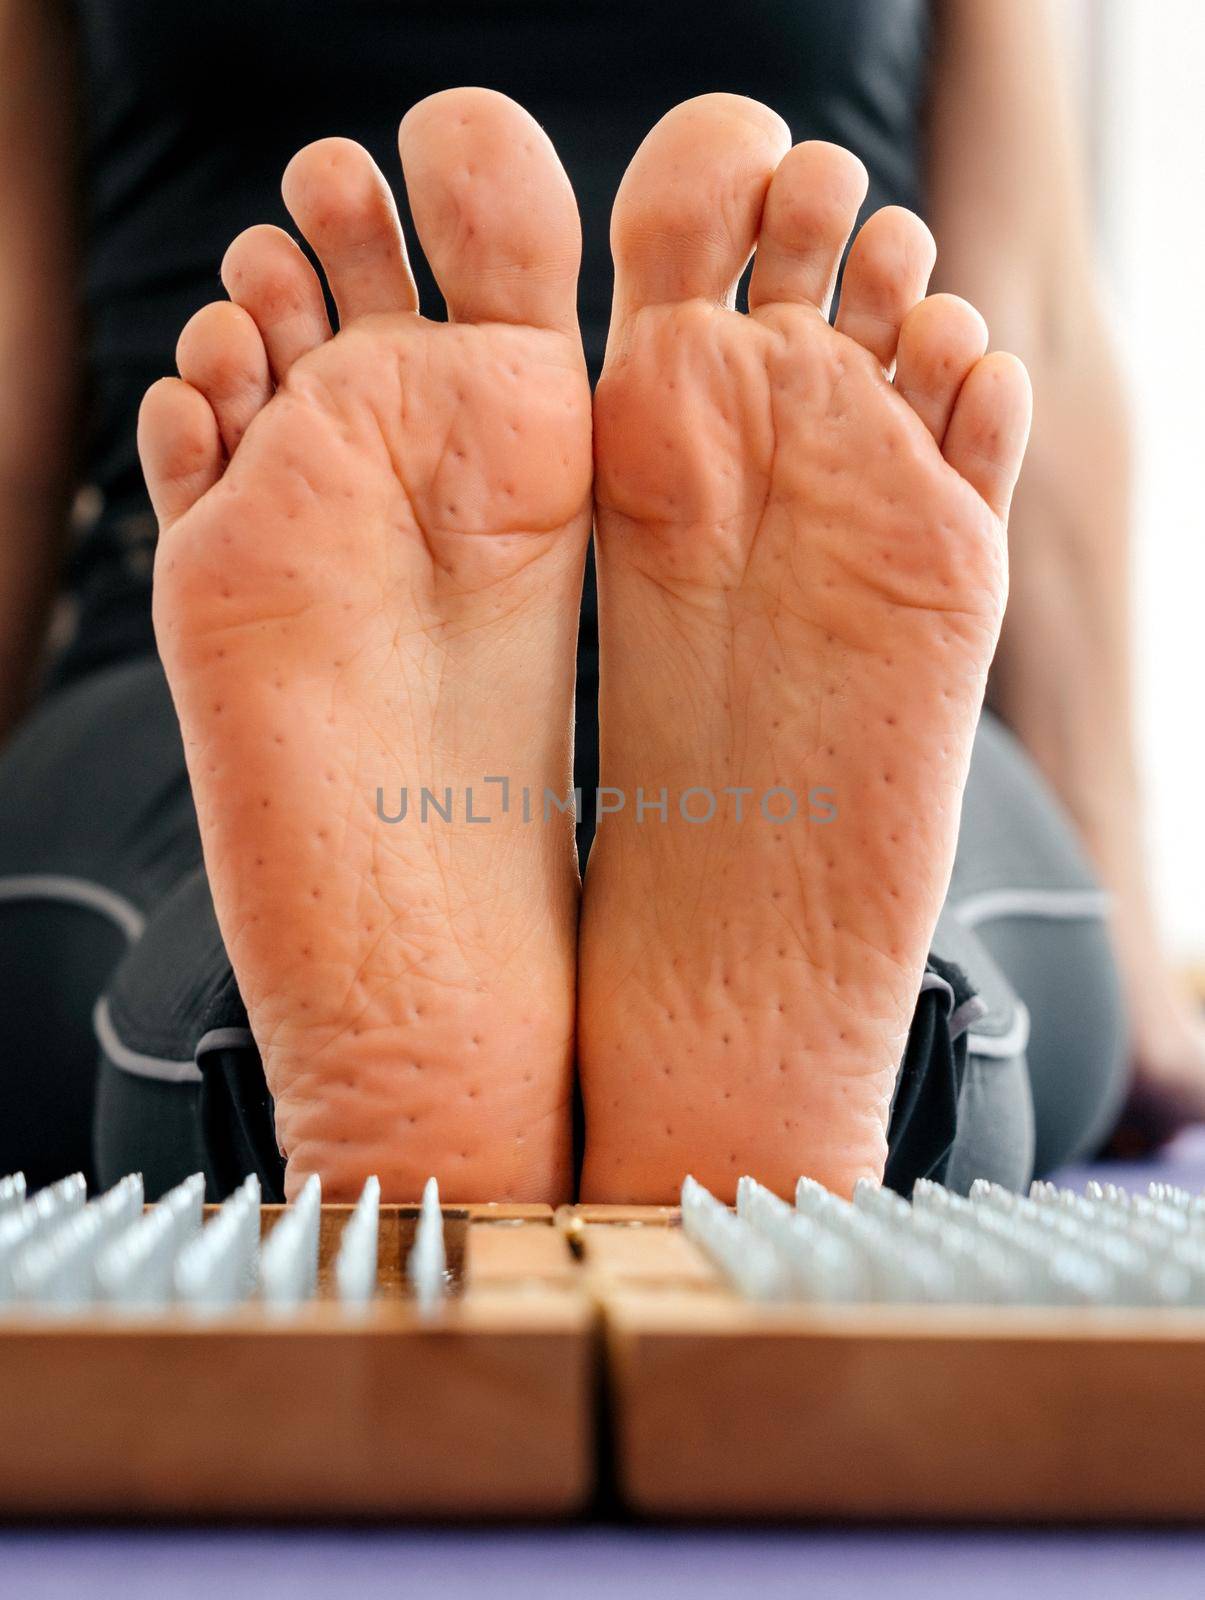 Feet and wooden board with sharp metal nails. Sadhu foot board. Yoga relaxation practice training by Mariakray